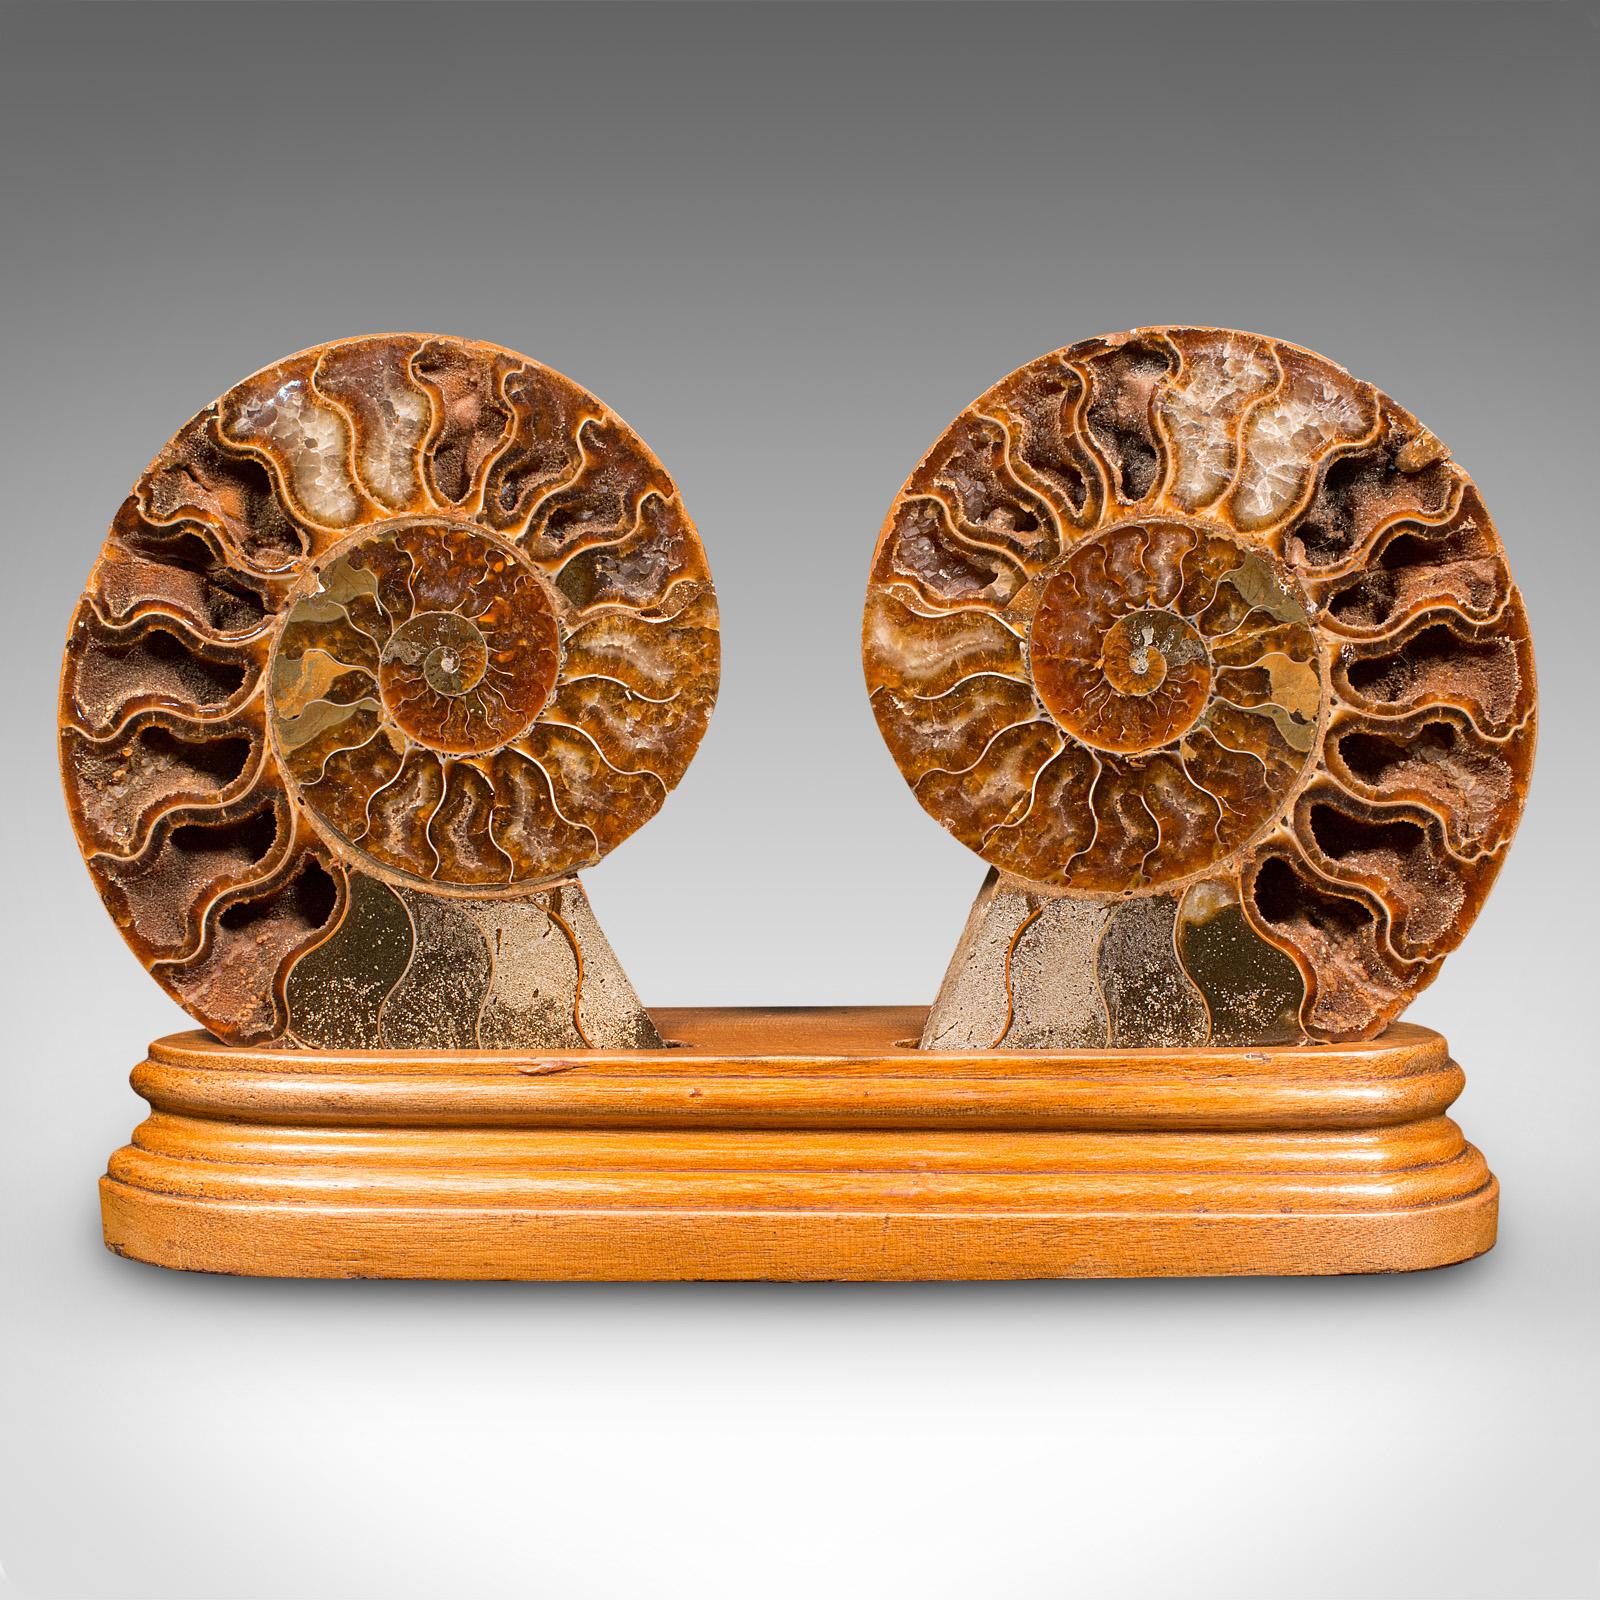 This is a vintage decorative halved ammonite. An African, opalized fossil on display plinth, dating to Cretaceous period millions of years ago, polished and presented circa 1970. 

Delightful example with a dual view of the fascinating fossil